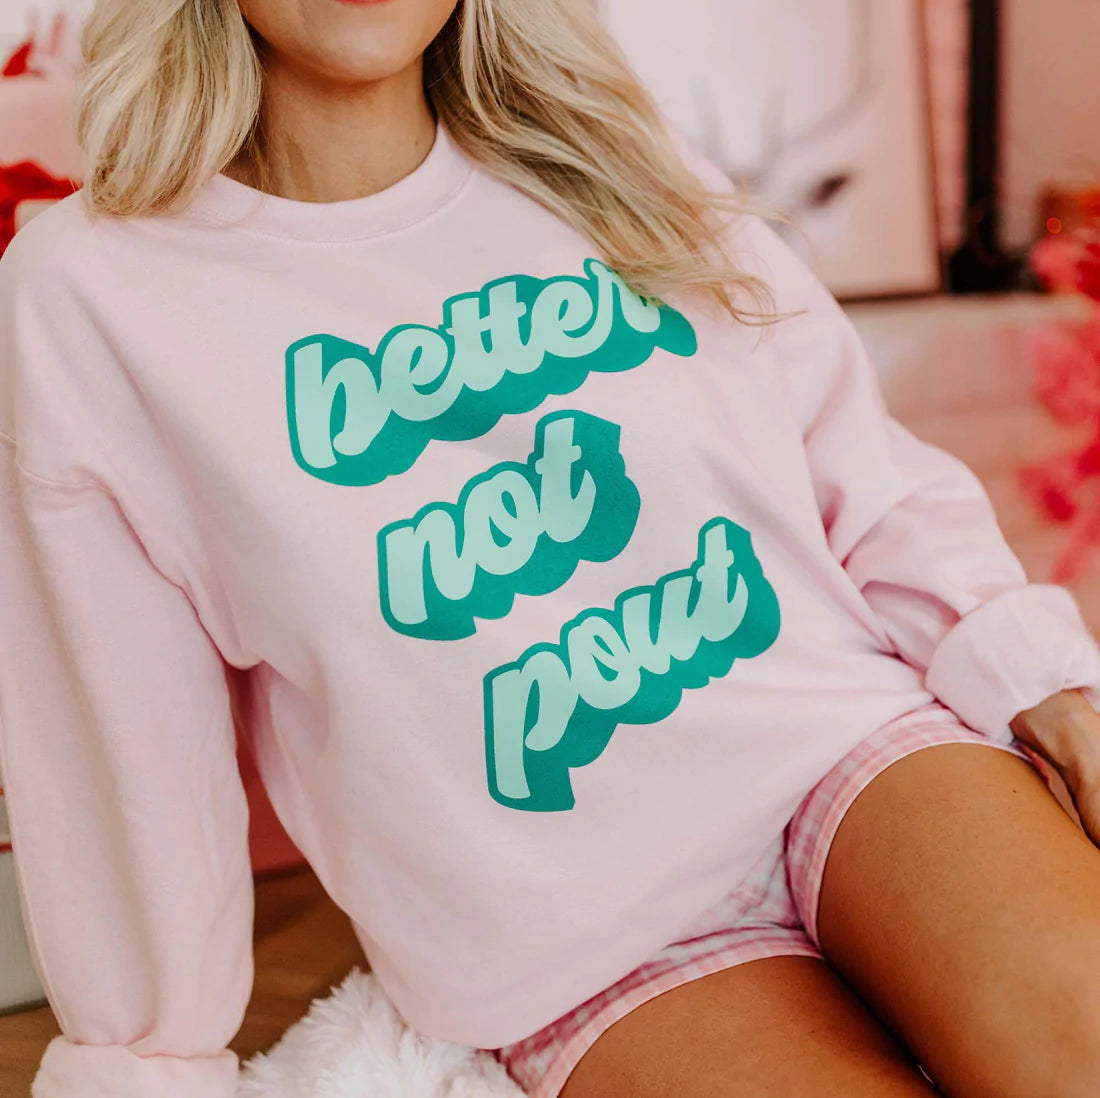 PREORDER: Better Not Pout Sweatshirt in Pink